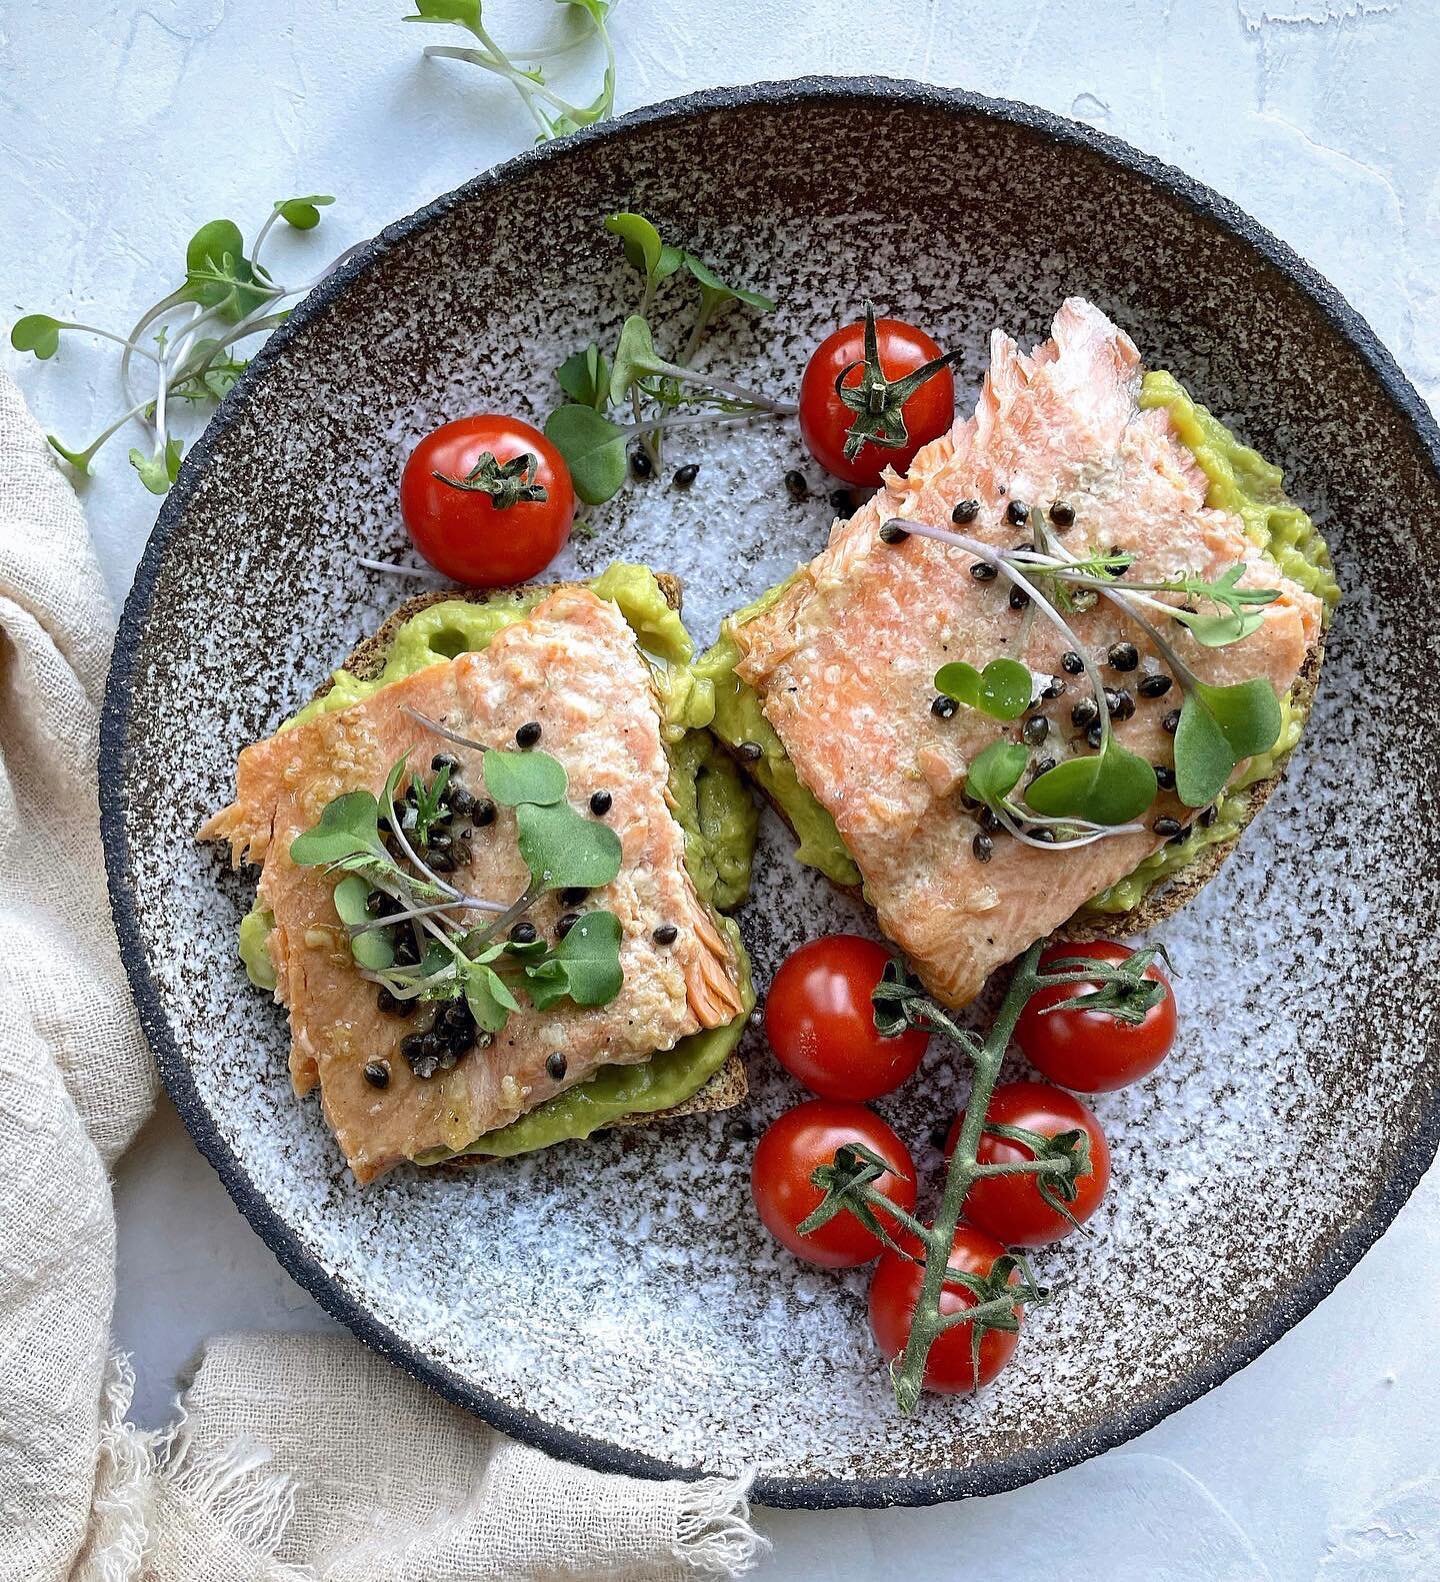 RAINBOW TROUT TOAST for #toasttuesday
⠀⠀⠀⠀⠀⠀⠀⠀⠀
(df, grain-free/gf, paleo, keto options &amp; RSF)
⠀⠀⠀⠀⠀⠀⠀⠀⠀
⭐️ SAVE THIS POST for an easy, nutritious-and-delicious fish recipe my whole family loves! ⭐️
⠀⠀⠀⠀⠀⠀⠀⠀⠀
Yes, I made extra Maple &amp; Soy Gla